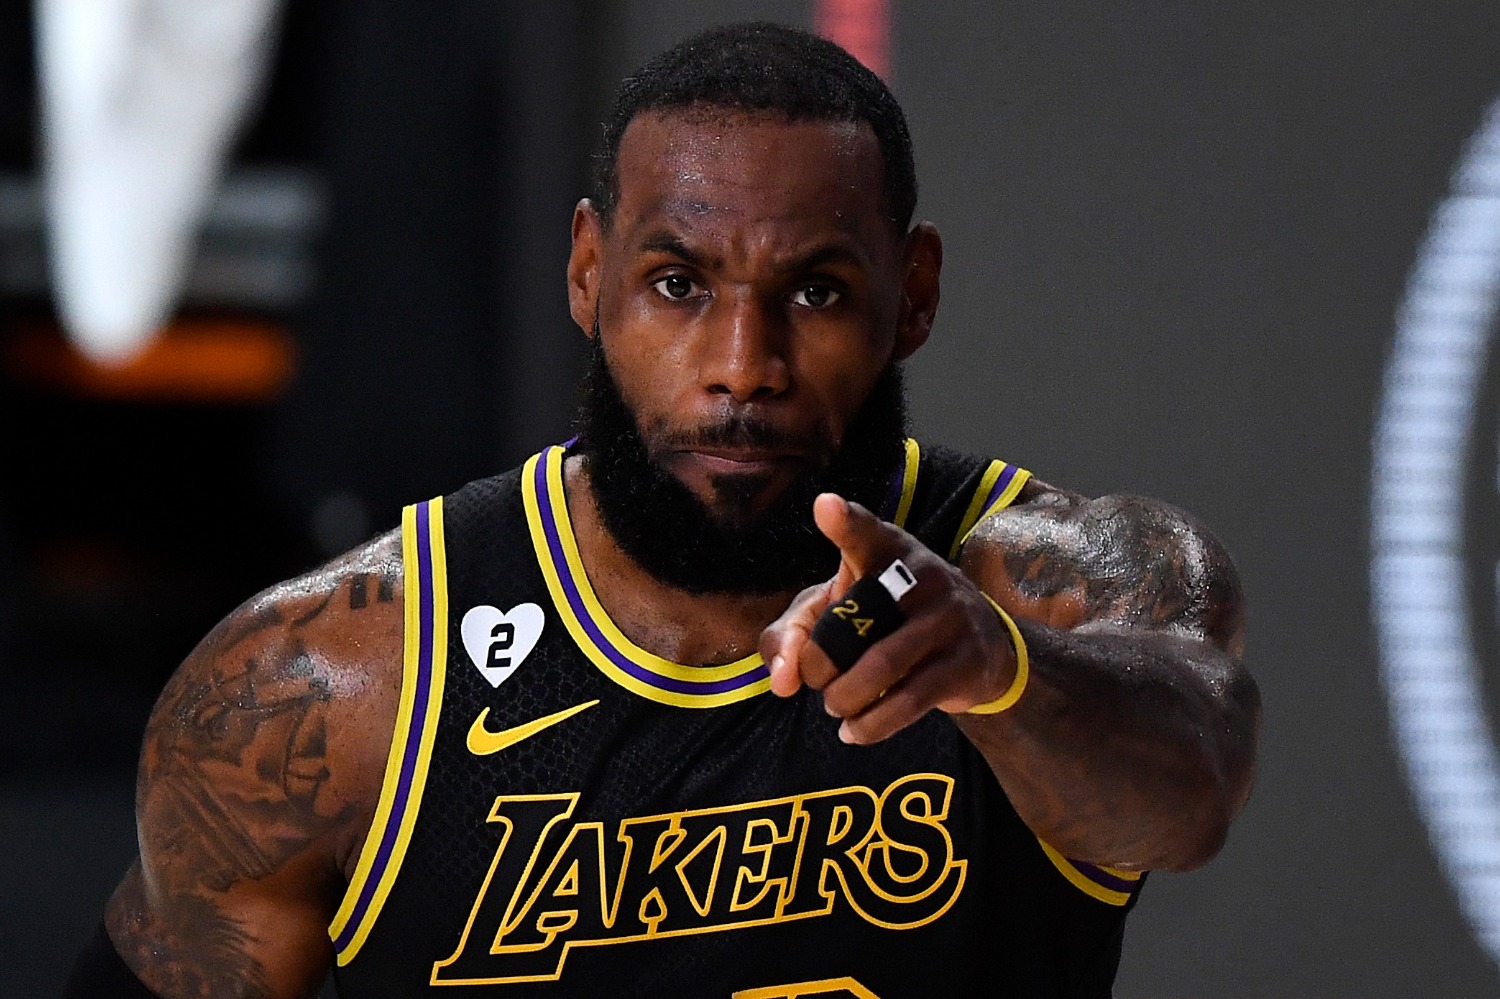 Lakers star LeBron James just unleashed the NBA's worst nightmare after expressing his displeasure with getting snubbed in the NBA MVP voting.